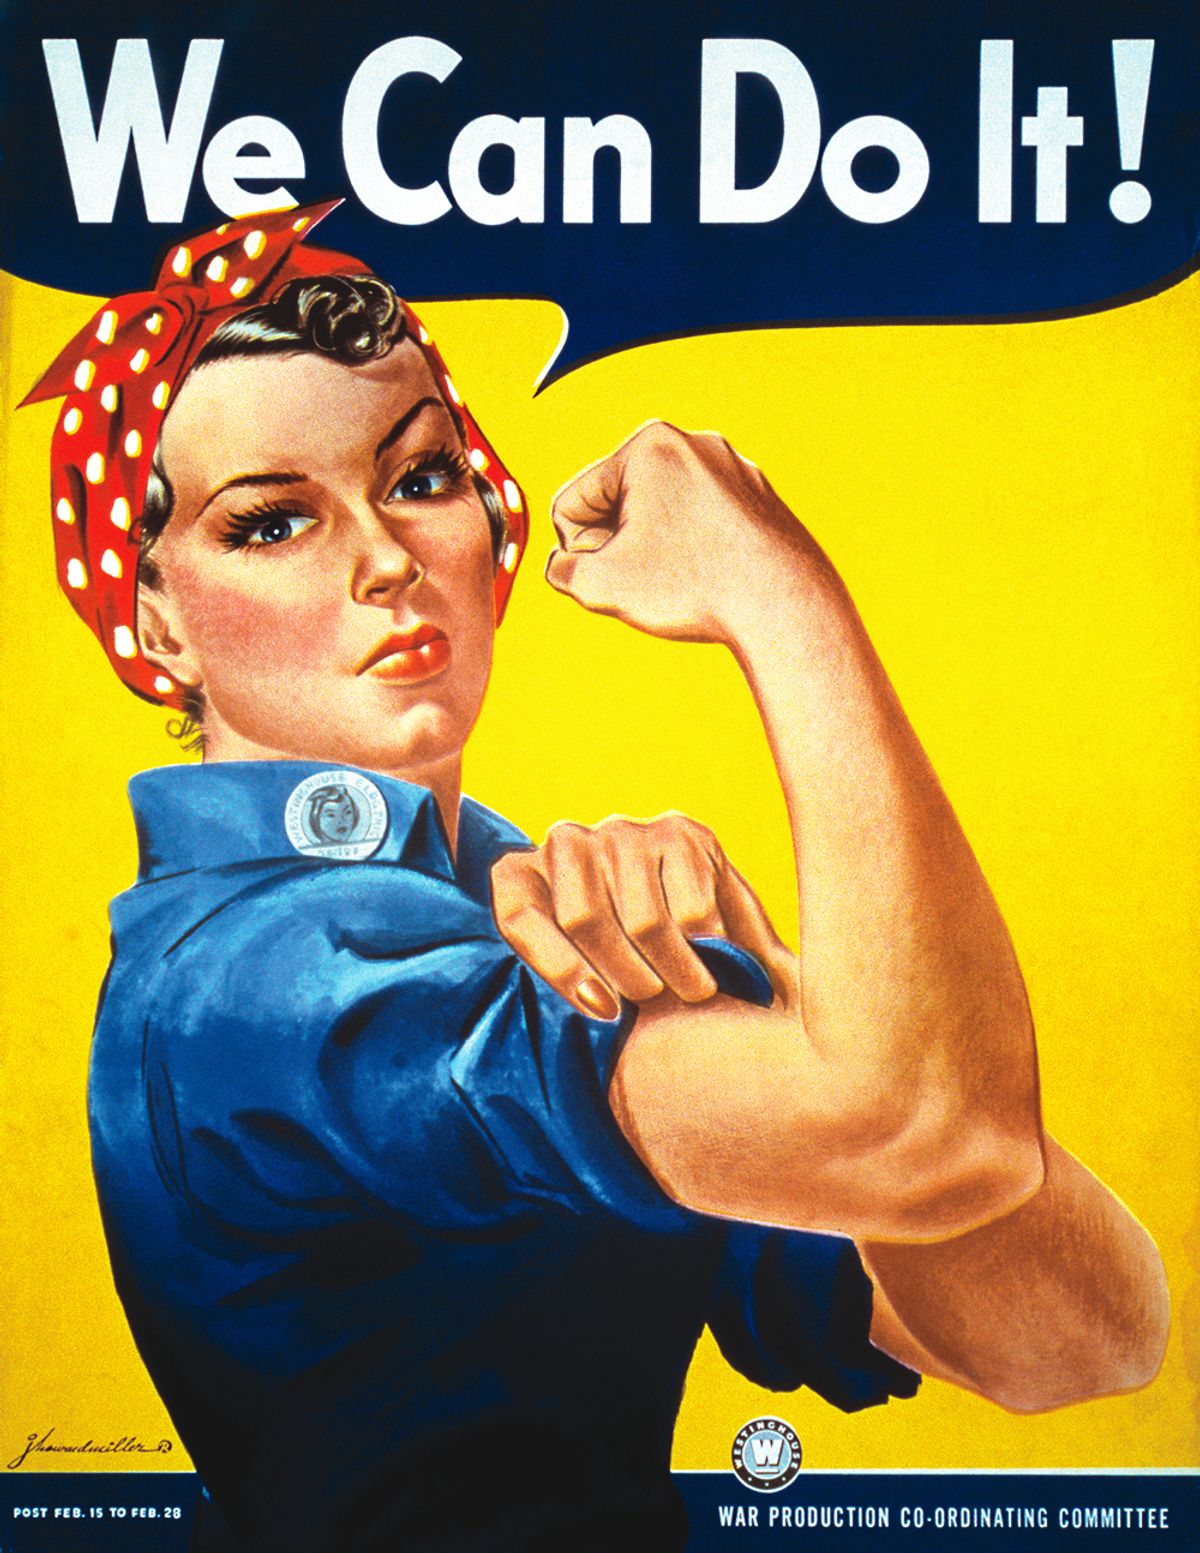 The poster We Can Do It! by J. Howard Miller was meant to boost worker morale at Westinghouse Electric 